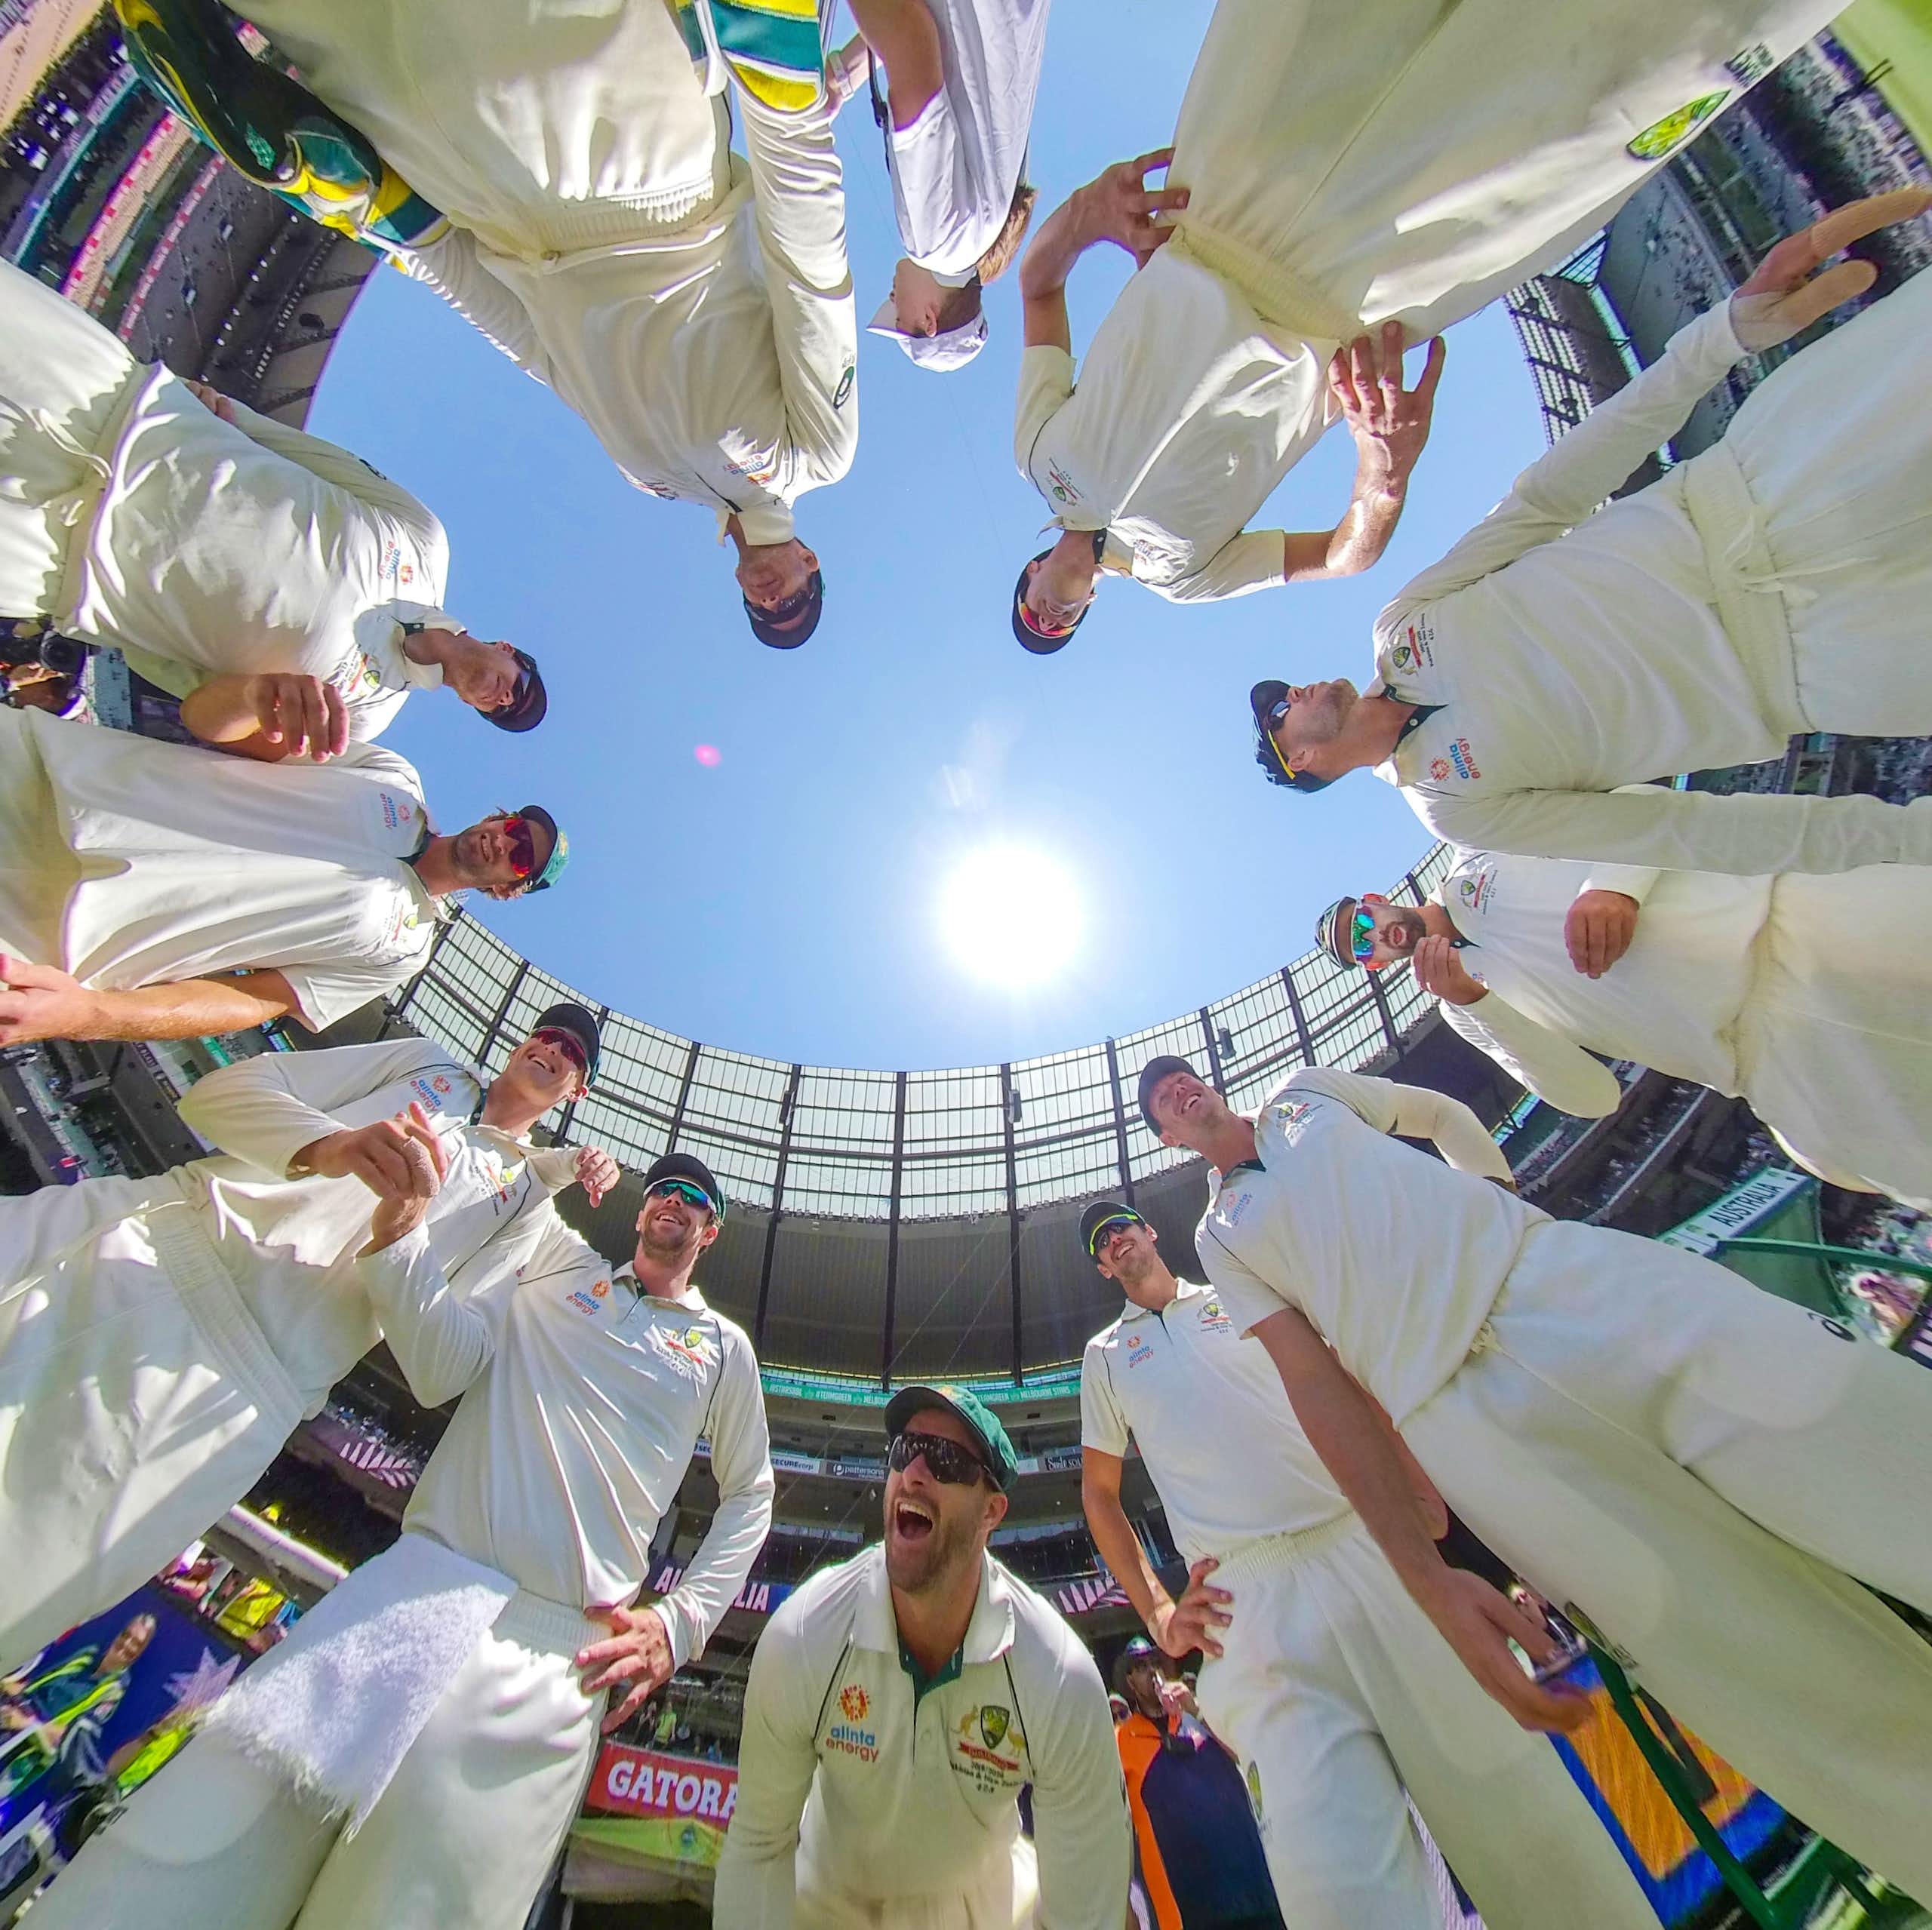 Tim Paine, captain of Australia speaks to his team in a huddle as Matthew Wade of Australia and his teammates look on during day 4 of the Boxing Day Test match between Australia and New Zealand at the MCG in Melbourne, Sunday, December 29, 2019.